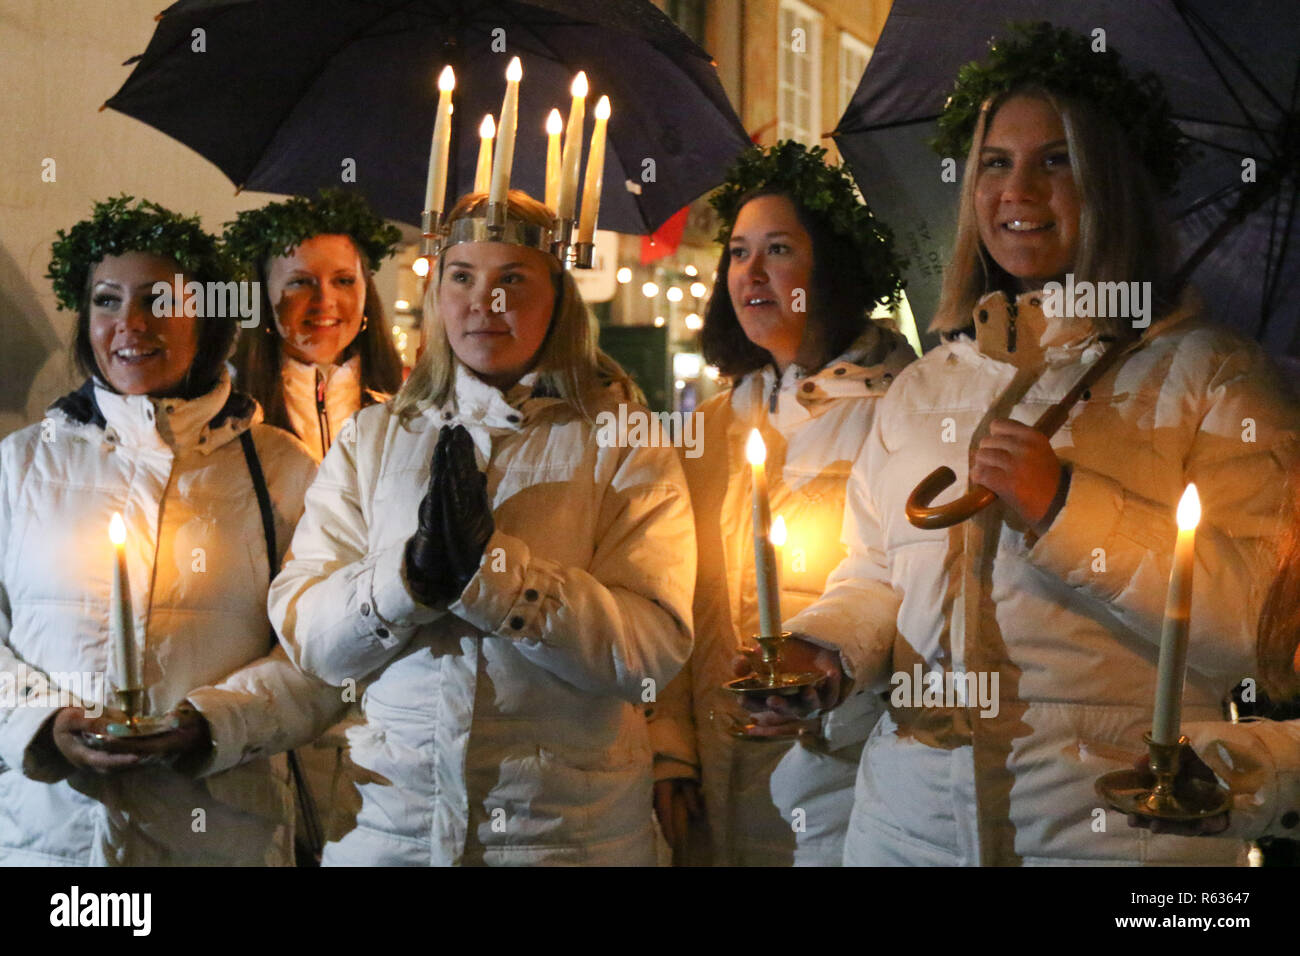 Gdansk, Poland 3rd. December 2018 Young girls from Kalmar, Sweden dressed in a white dress and a red sash (as the symbol of martyrdom) carrying candles singing in the Gdansk Old City centre. Swedish girls dressed as Saint Lucy (Sankta Lucia)  carry cookies in procession and sing a songs. It is said that to vividly celebrate St. Lucy's Day will help one live the long winter days with enough light  Credit: Max Ardulf/Alamy Live News Stock Photo